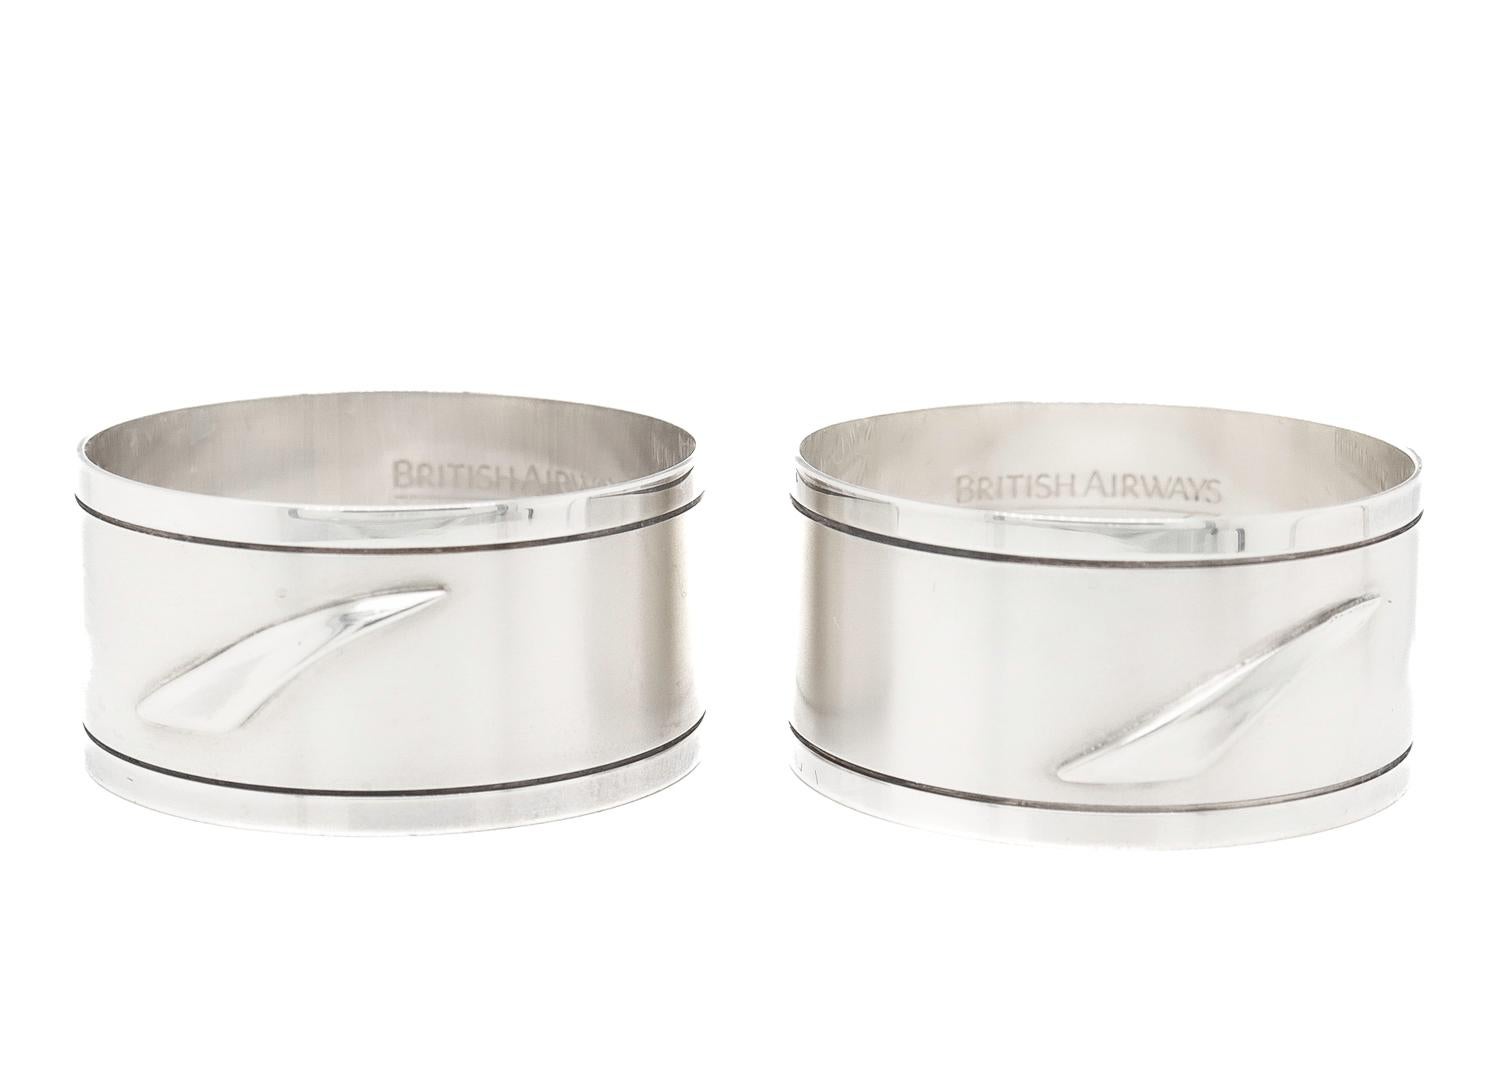 Pair British Airways Concorde Sterling Silver Napkin Rings in the Original Box For Sale 1